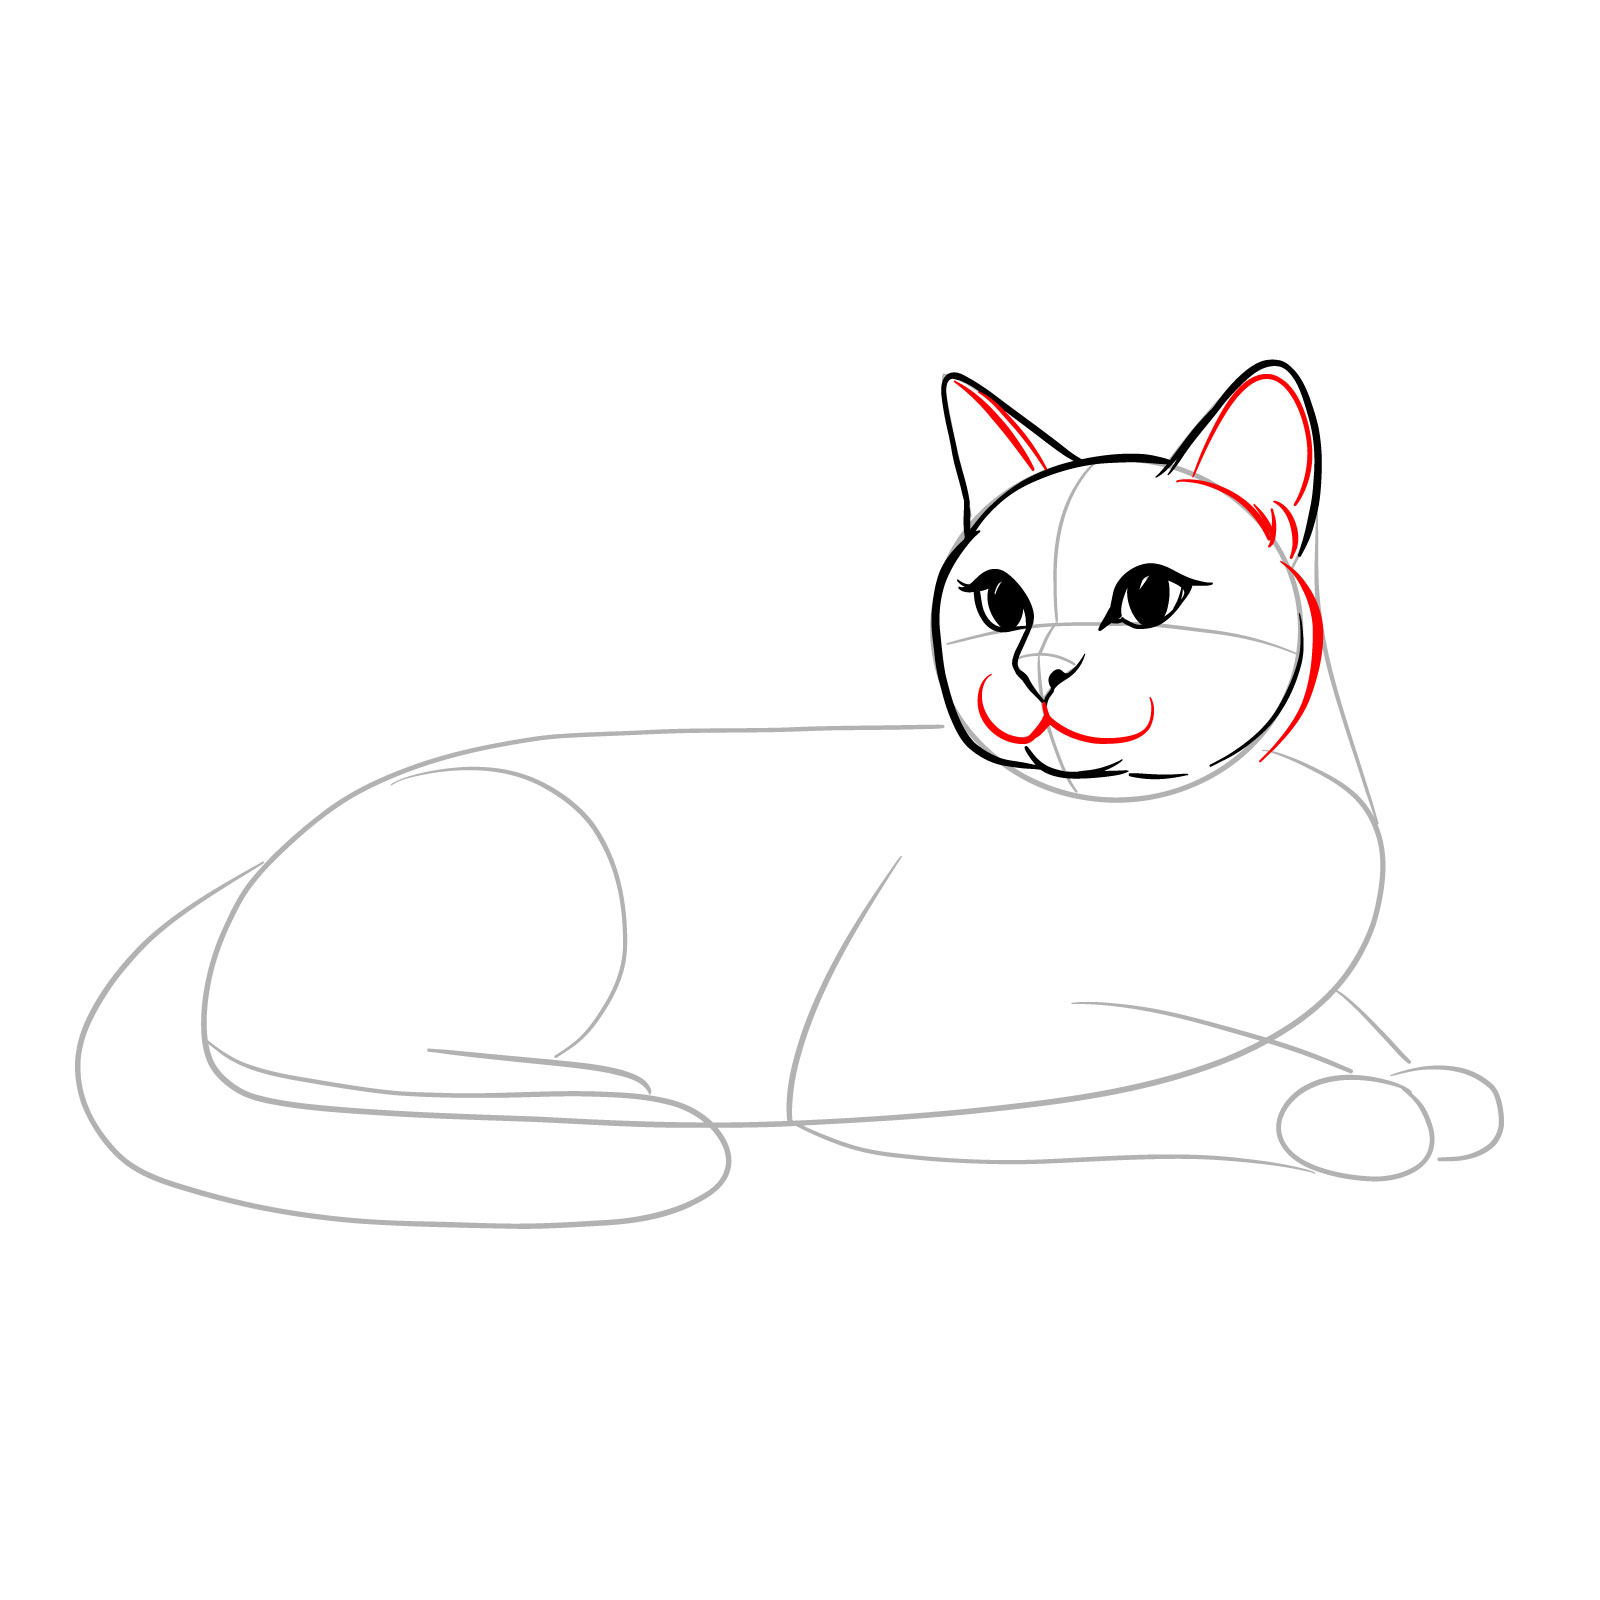 Adding the mouth and detailing the ears of the lying cat drawing - step 08